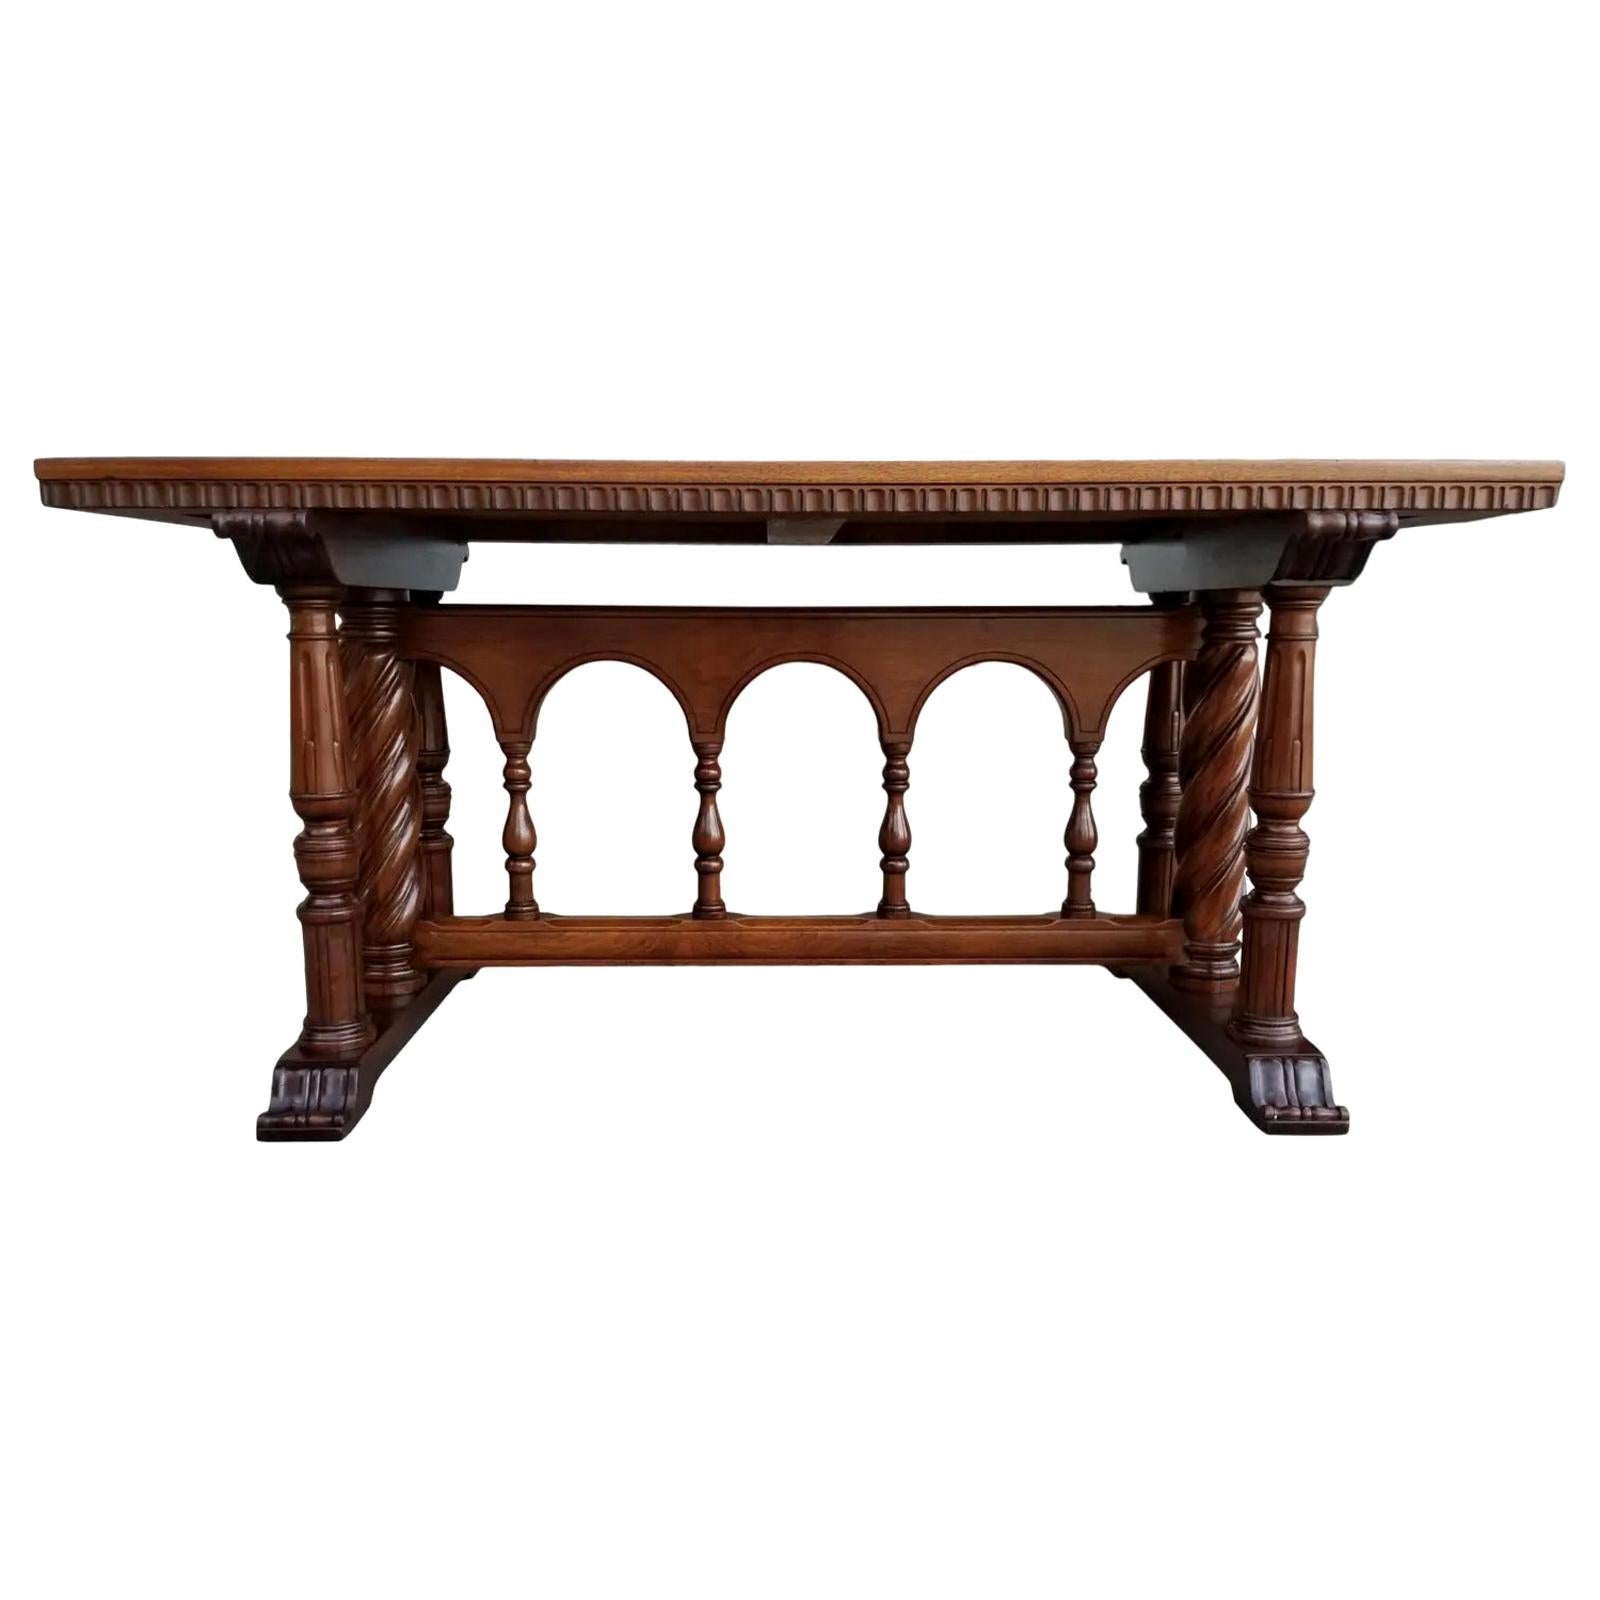 Early 20th Century Refectory or Library Table